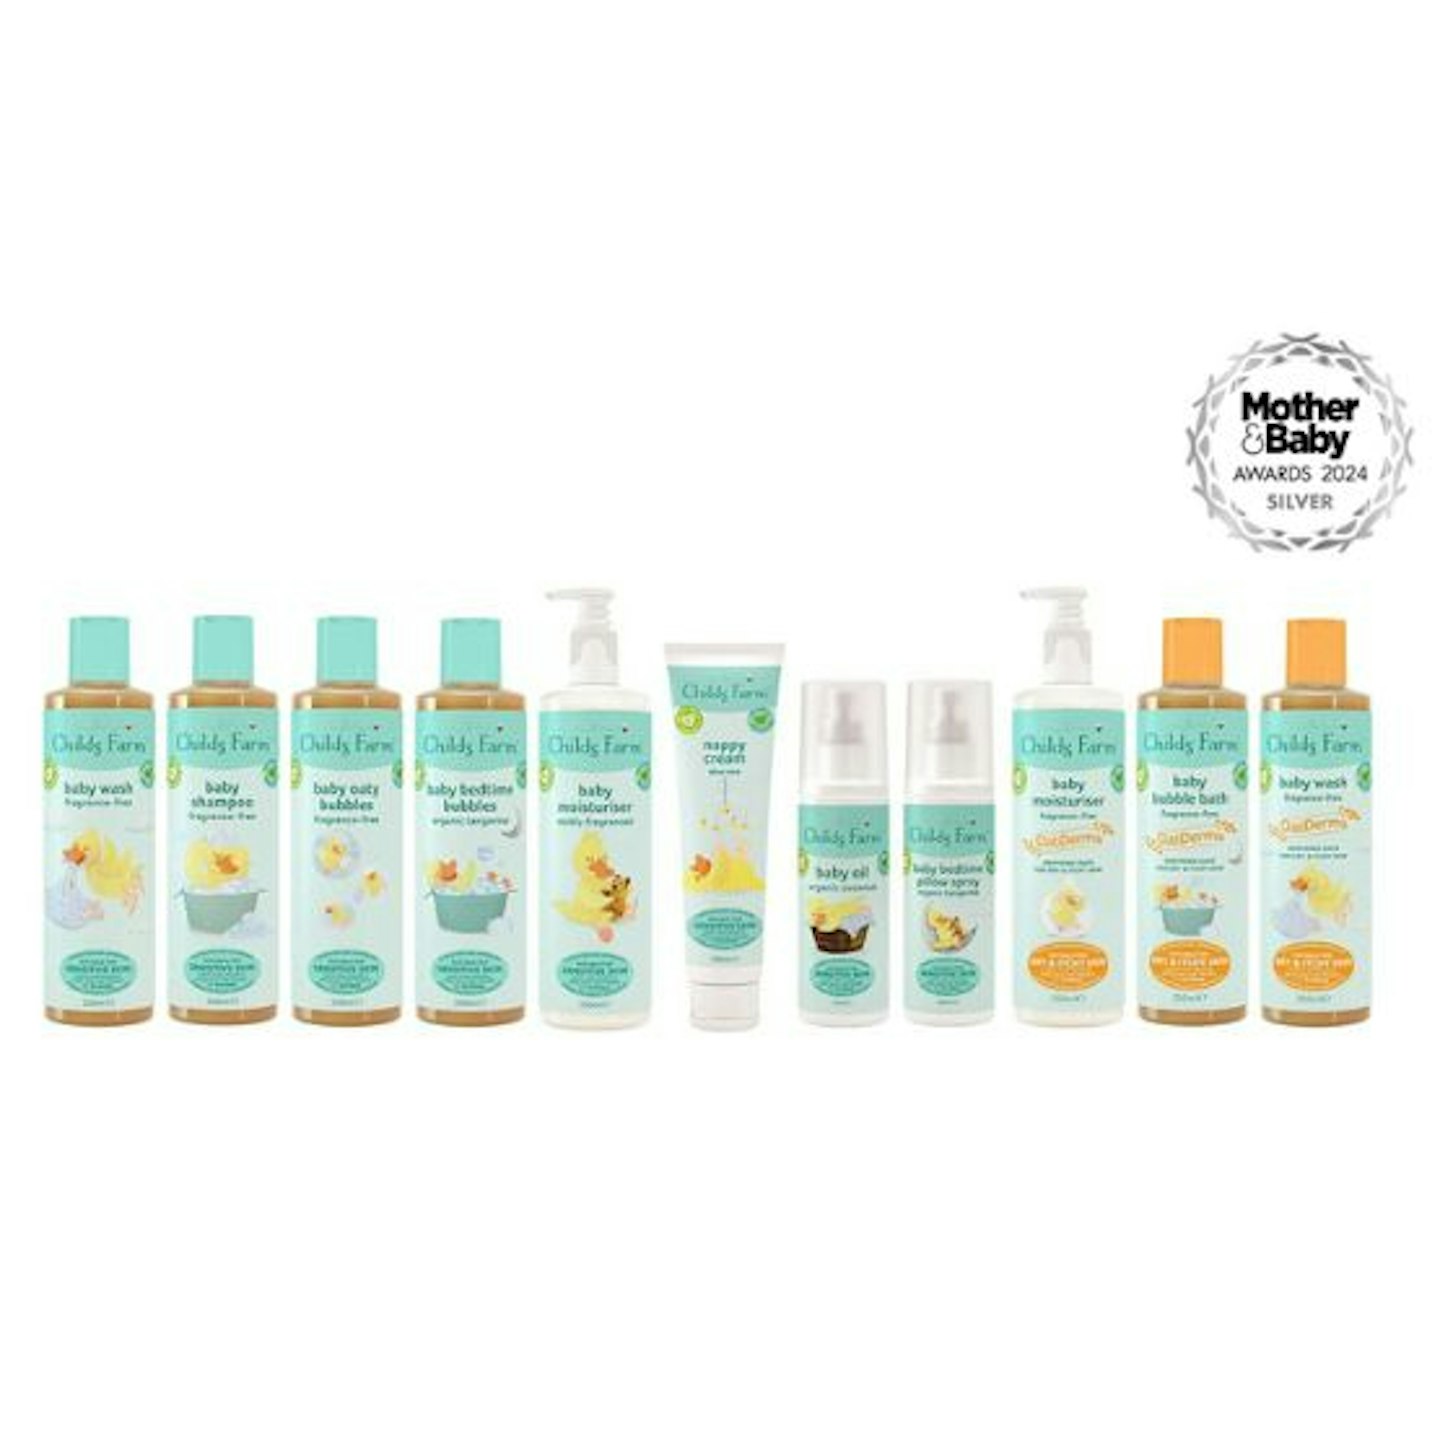 Childs Farm Toiletries Range for Baby and Child